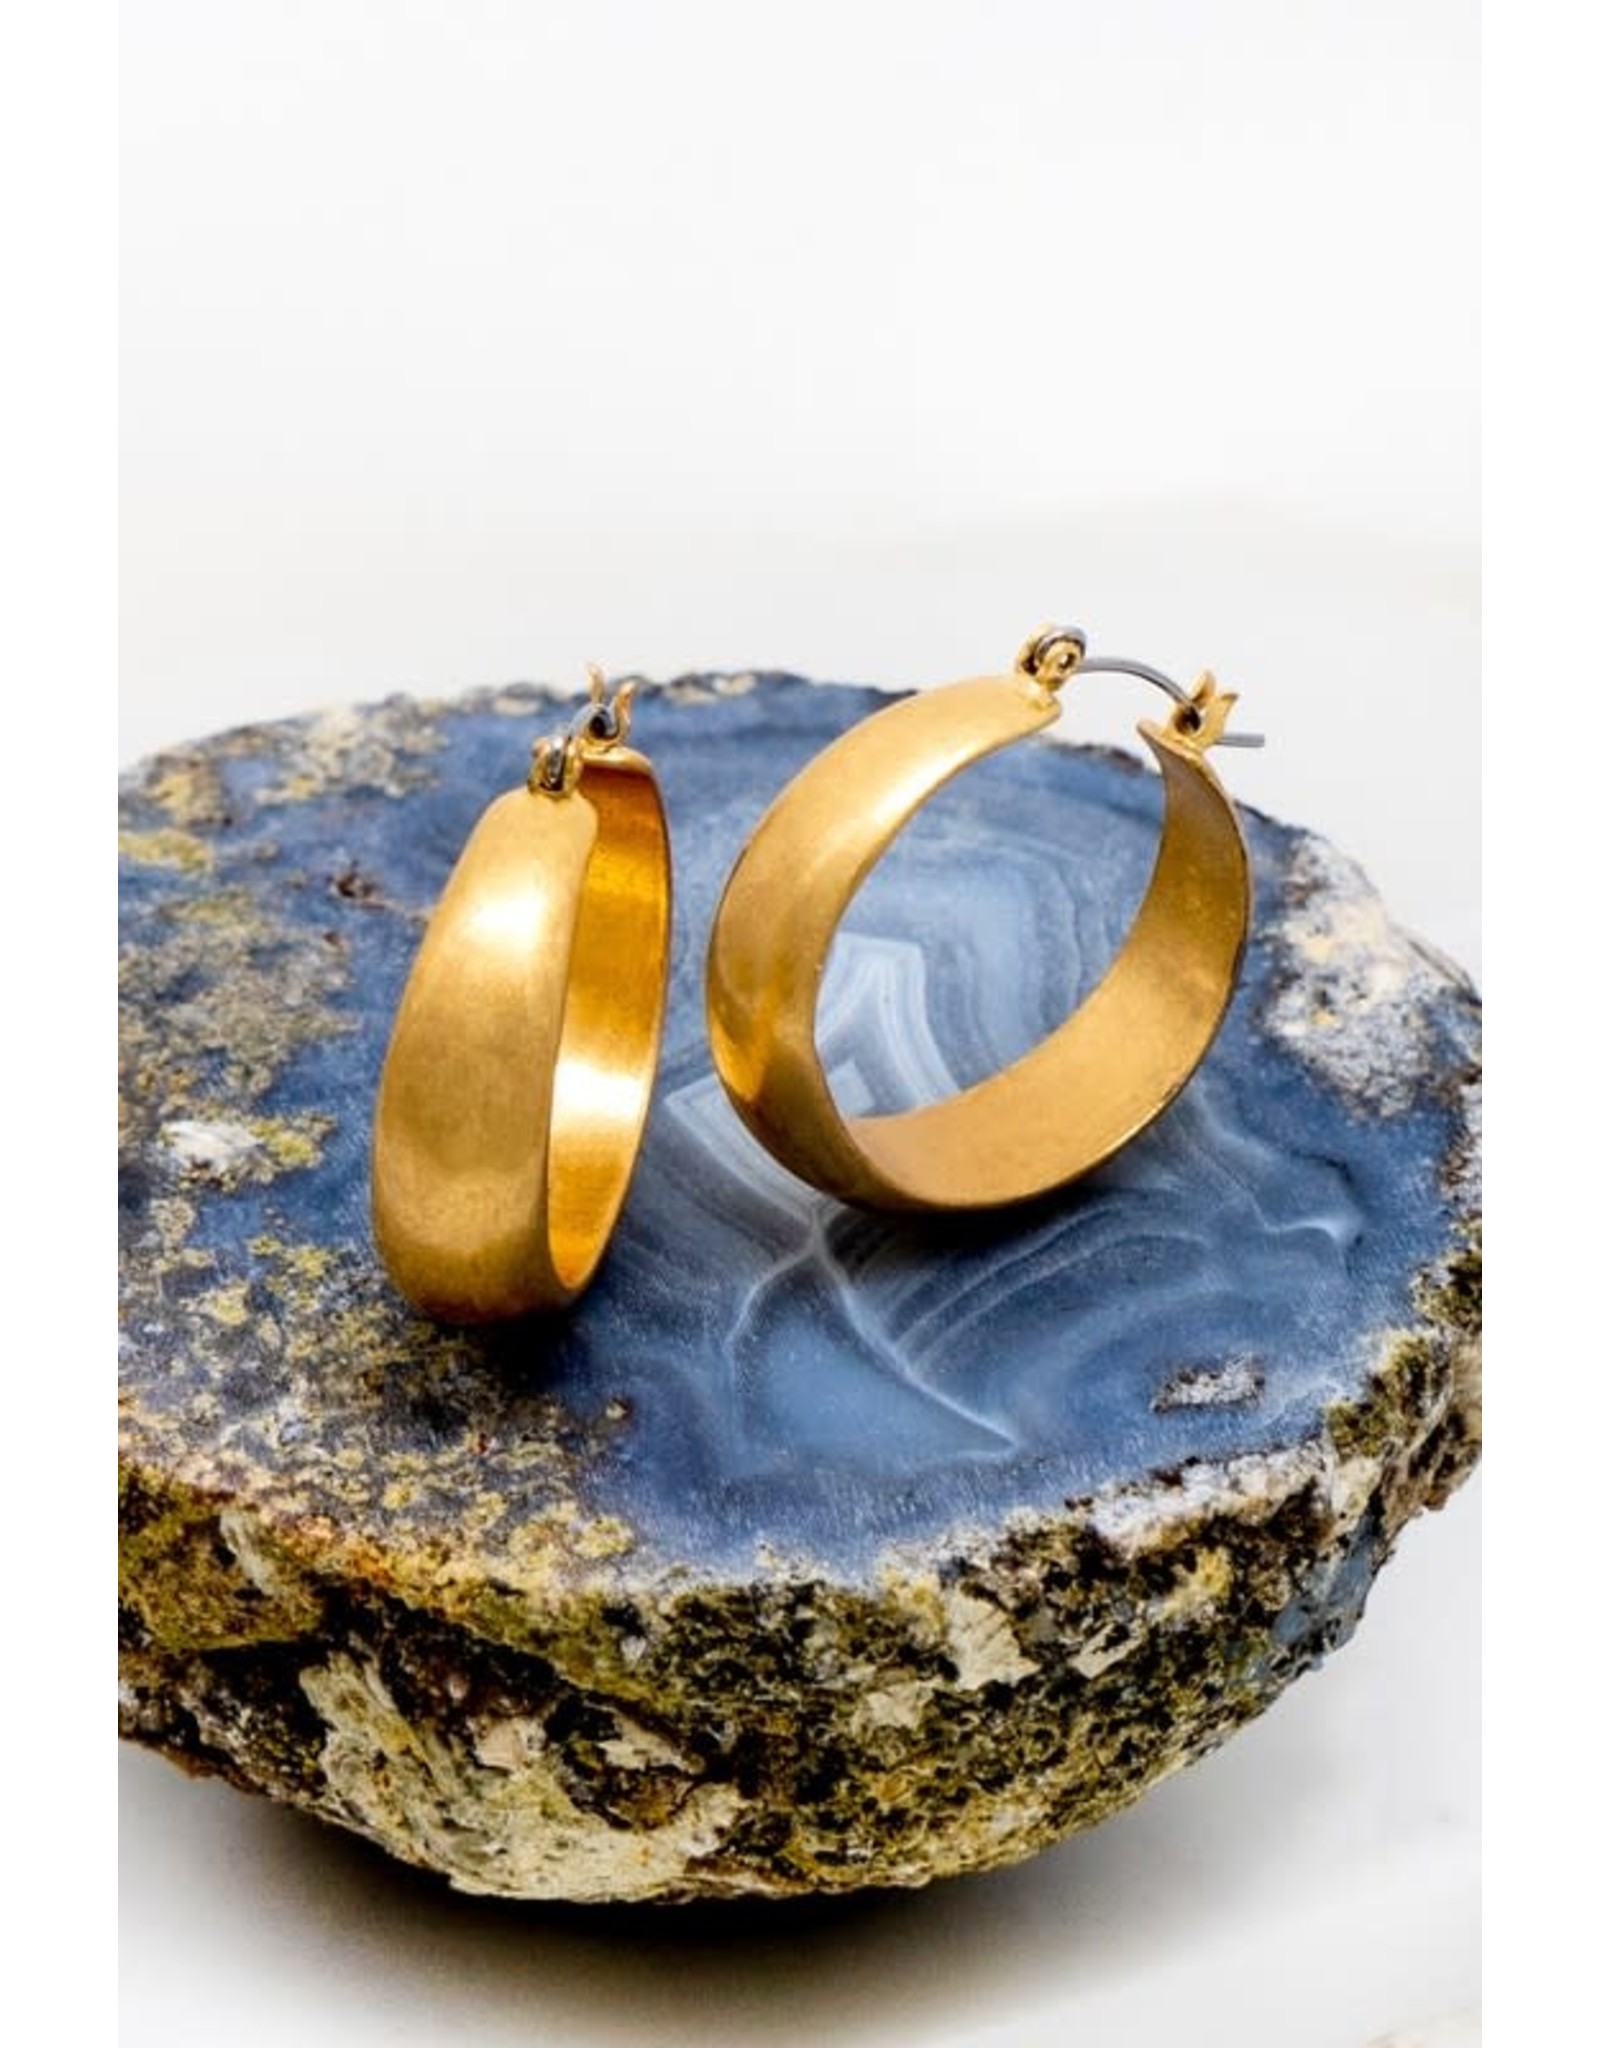 Made Of Alloy Casting. Size: 1.0" Smooth And Polished Small Wide Hoop Earrings - Color: Gold